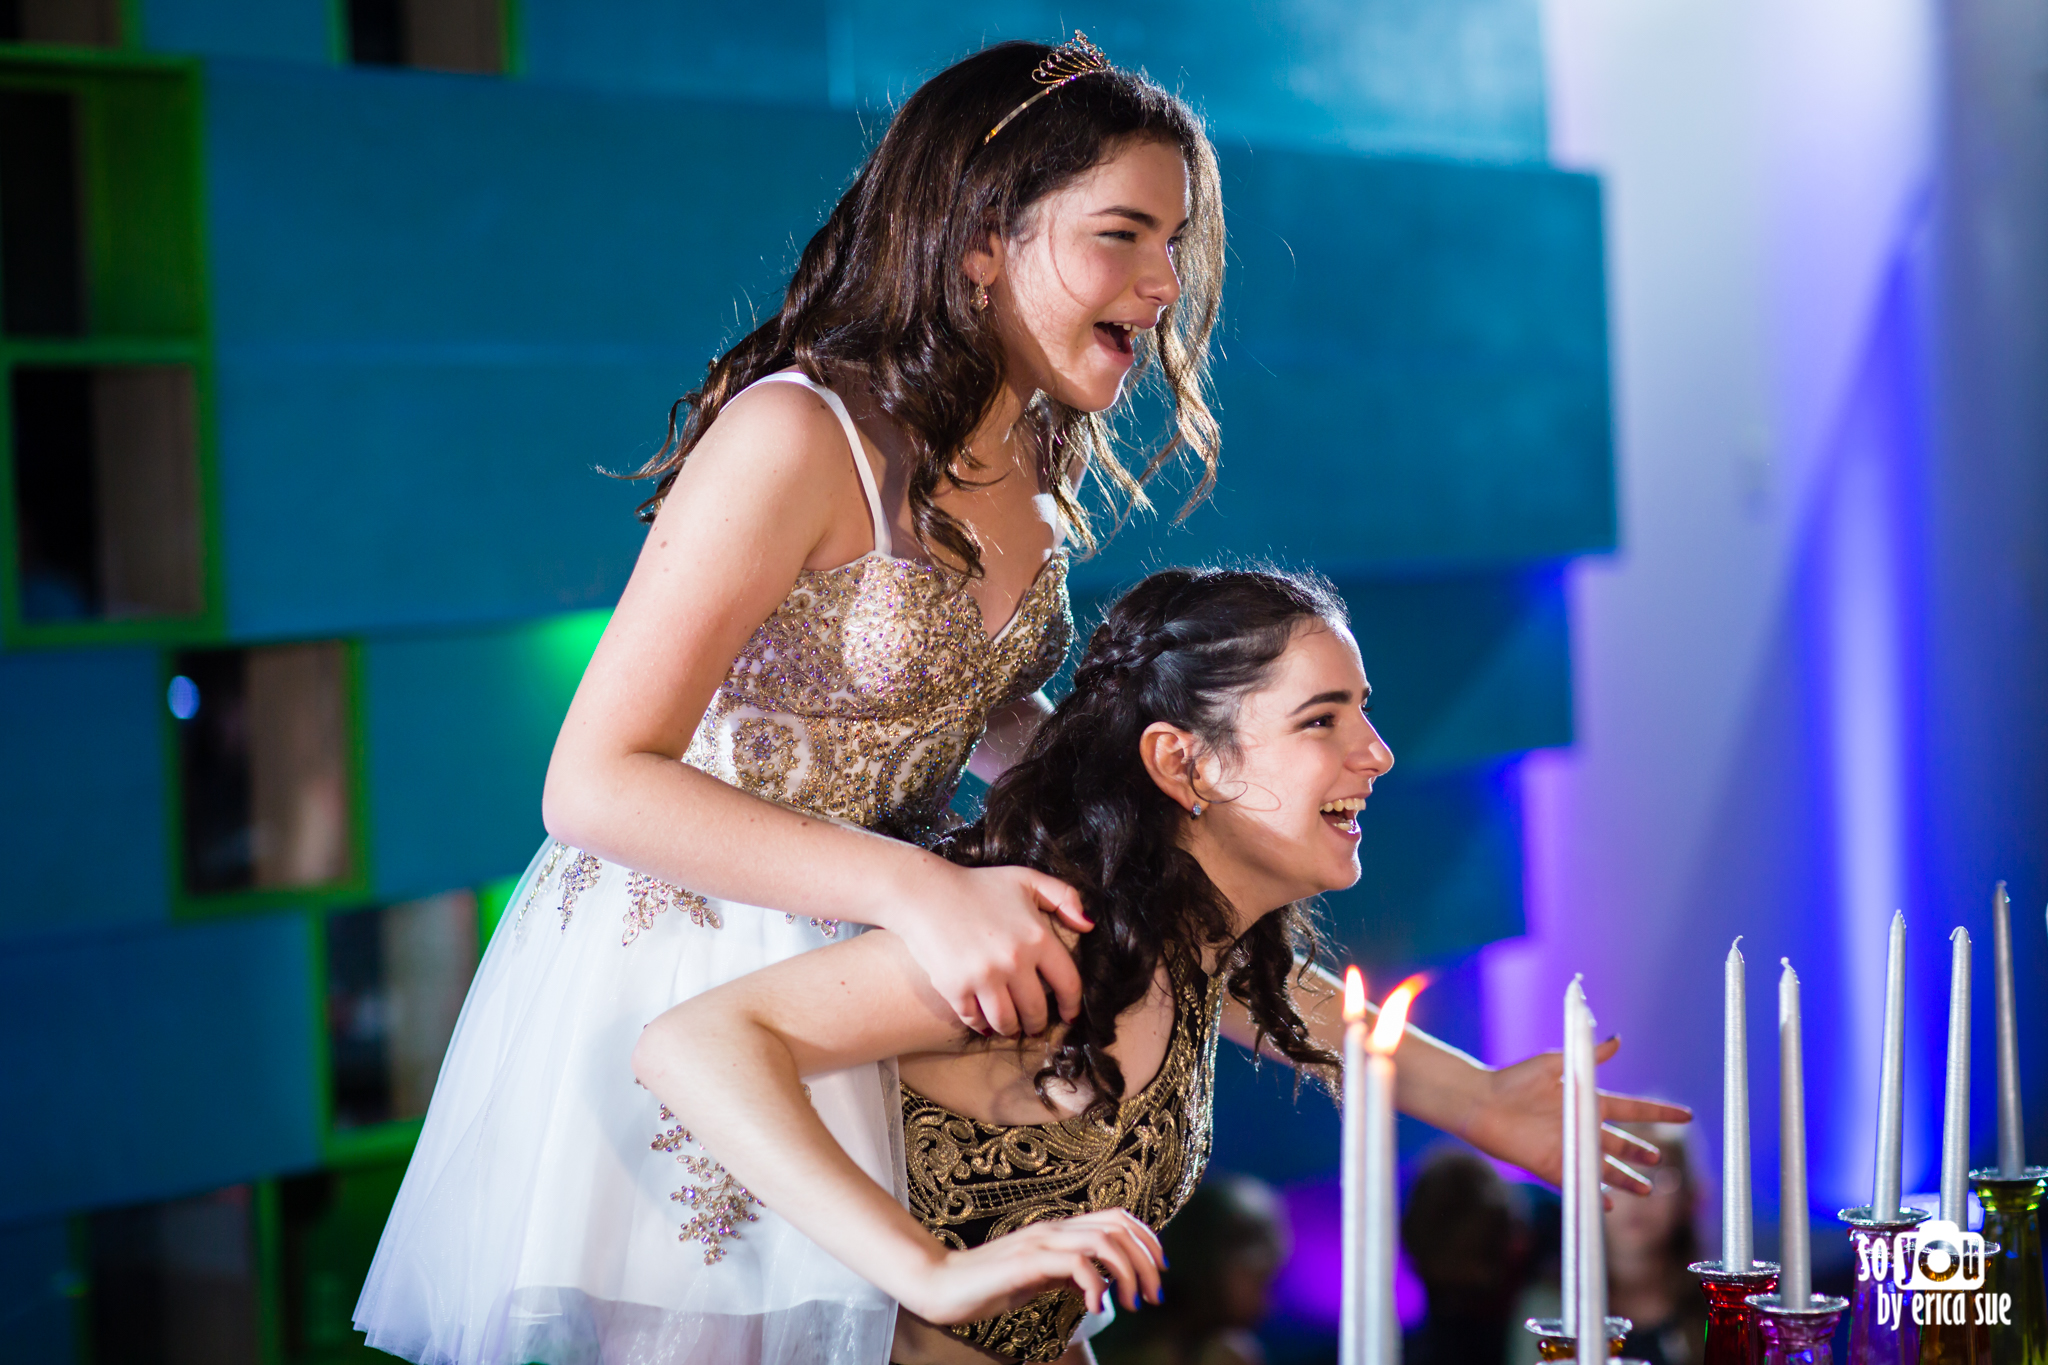 so-you-by-erica-sue-bar-bat-mitzvah-young-at-art-davie-fl-photography-5448.jpg